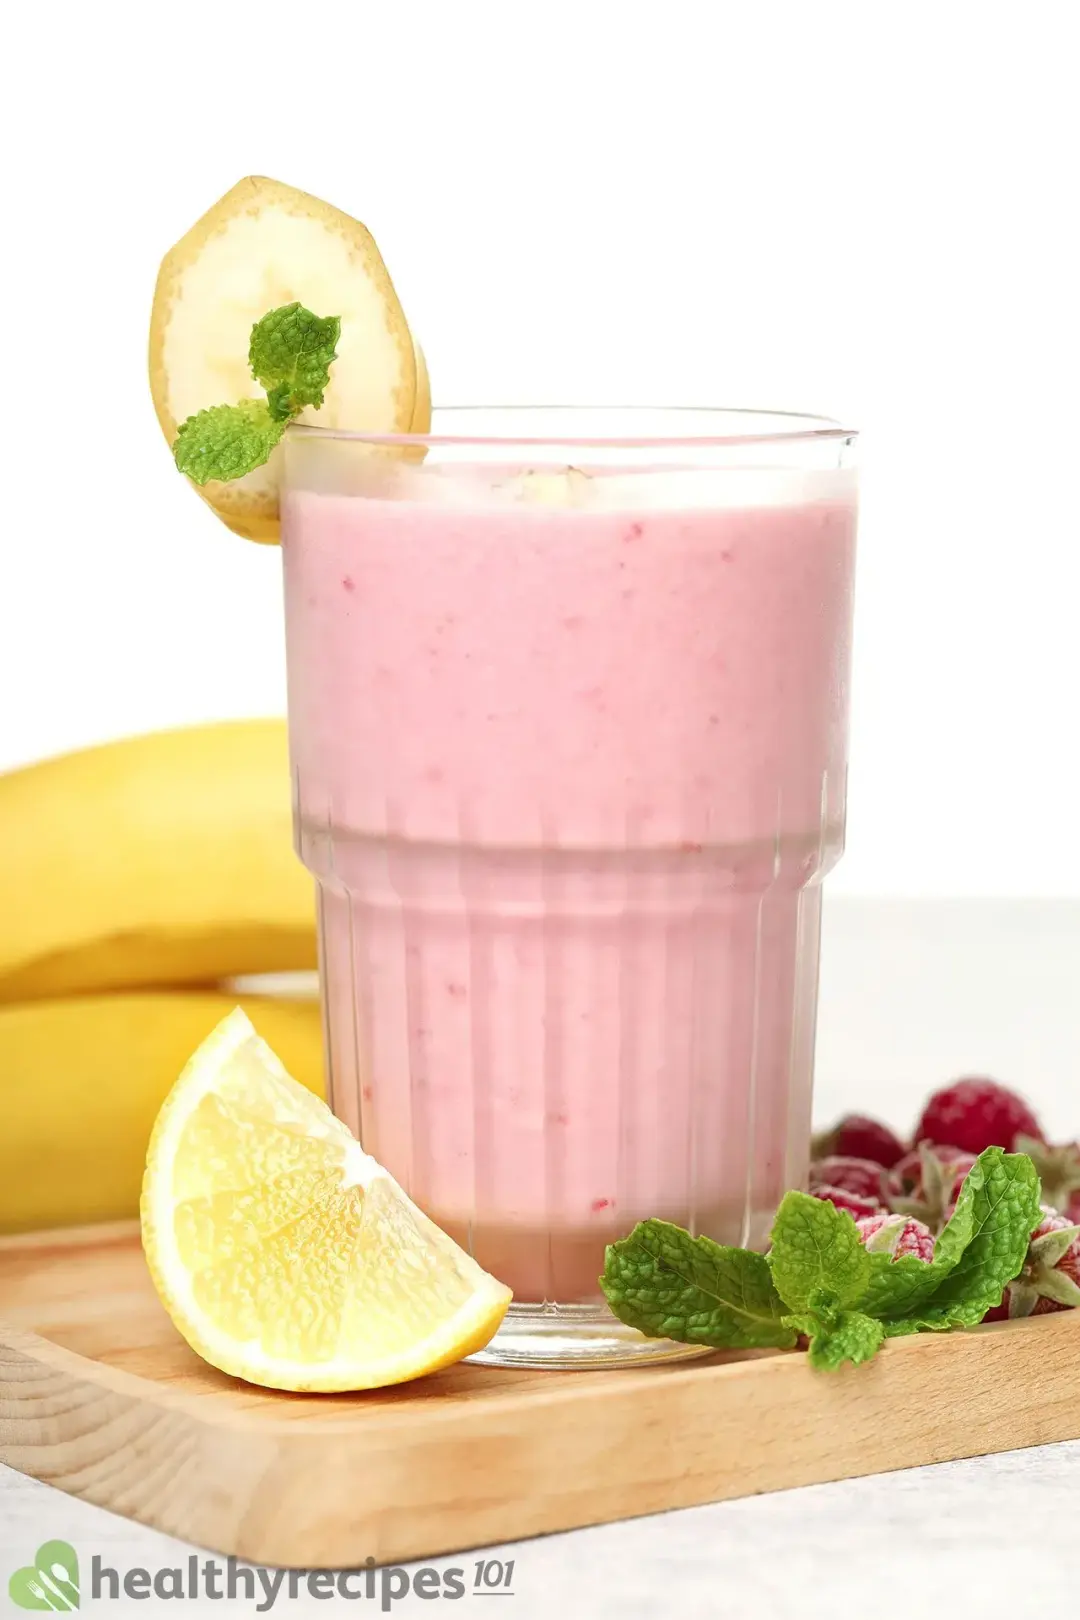 Raspberry Banana Smoothie Recipe - Beautiful and Packed With Flavor